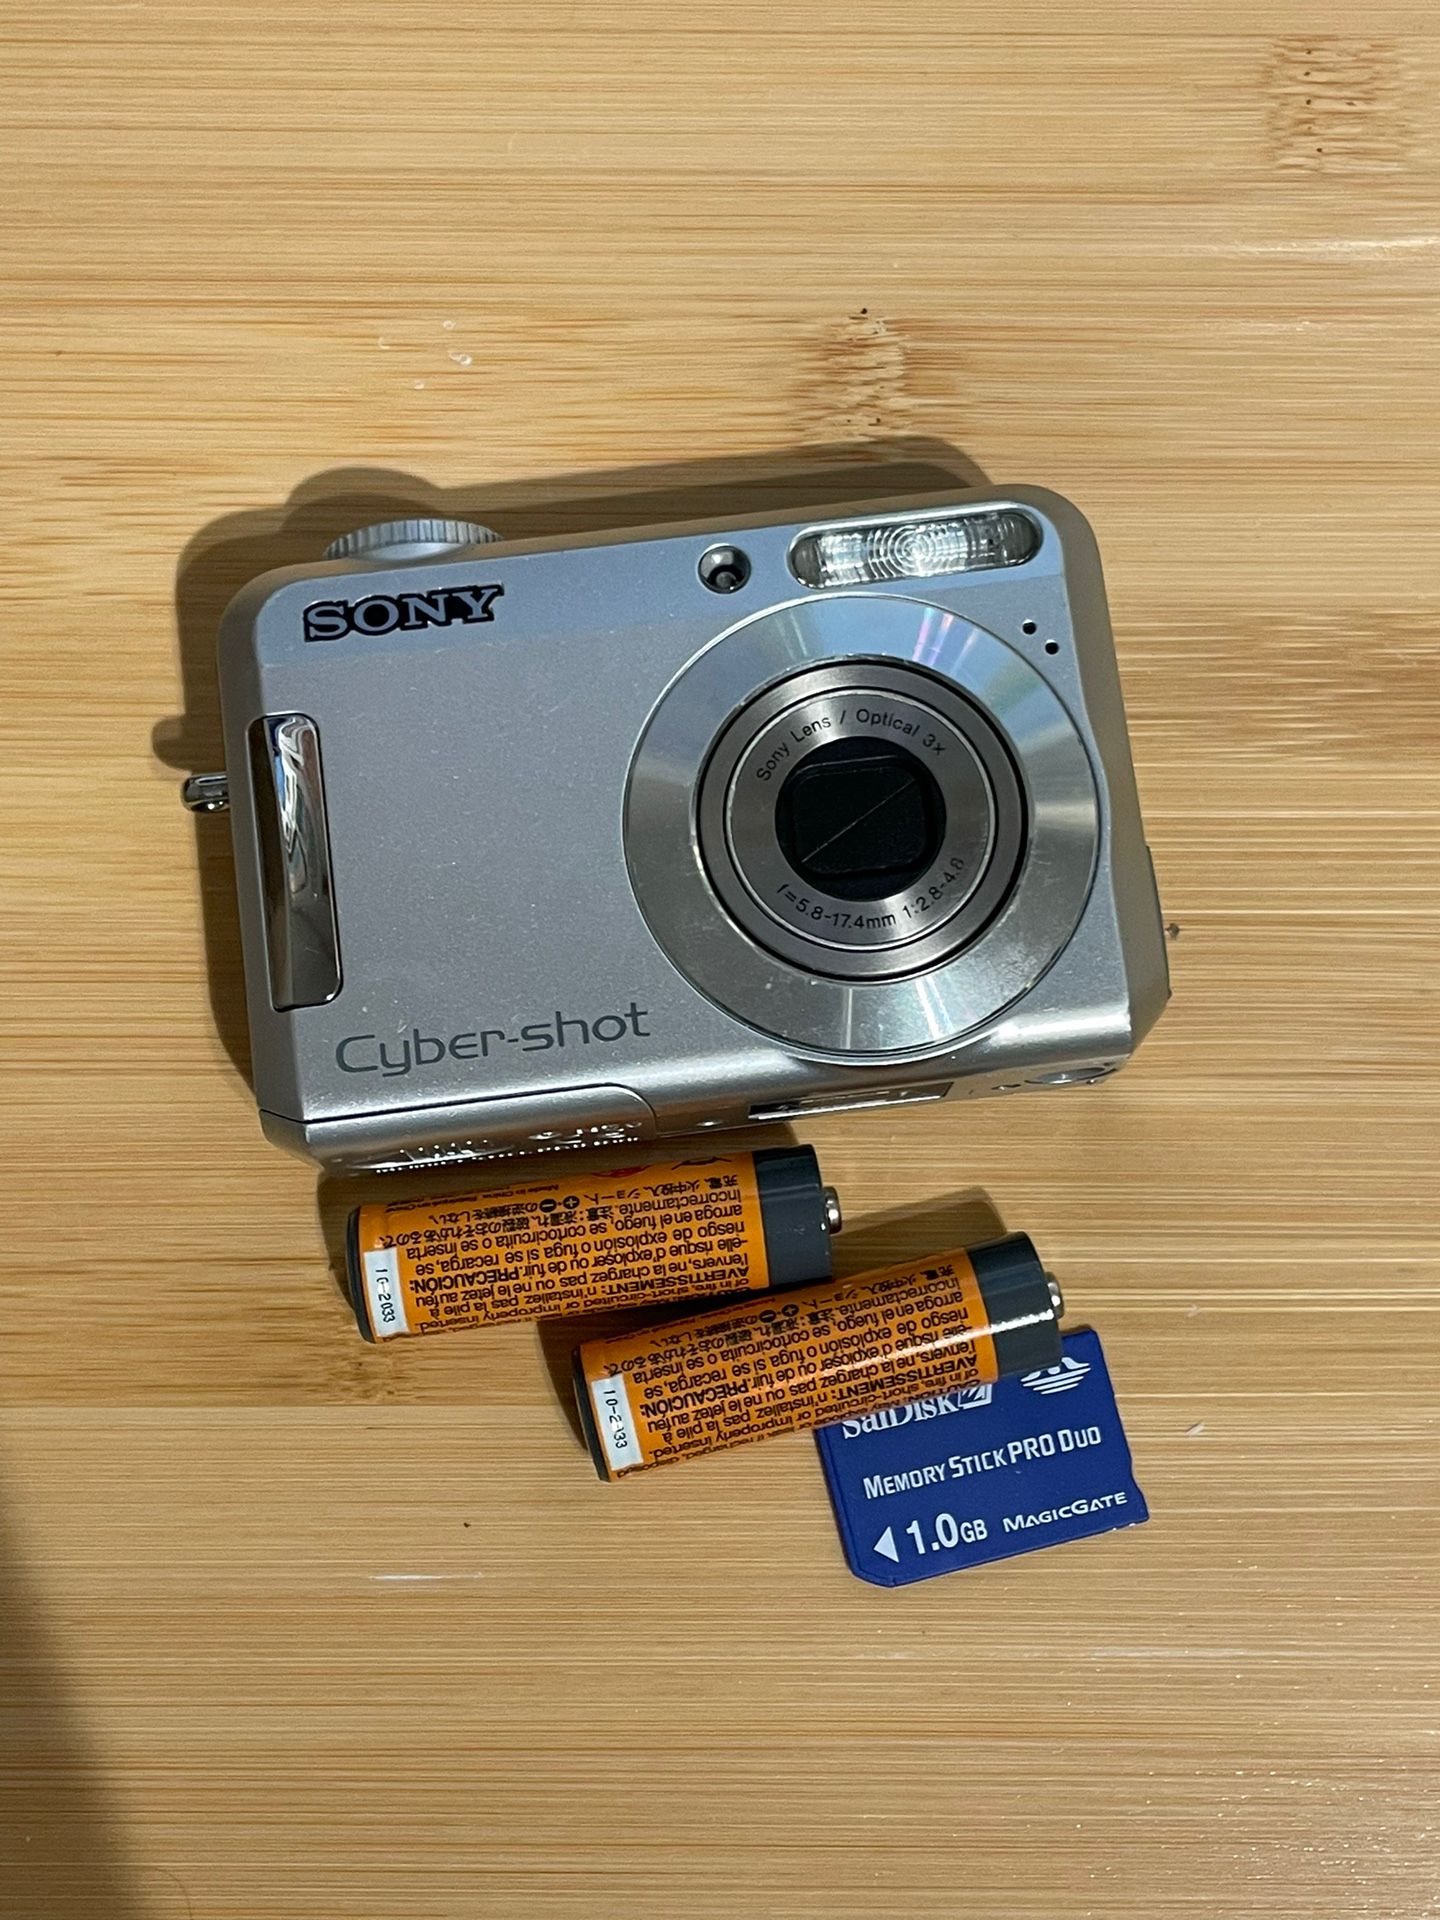 sony cybershot dsc-s650 digital camera 7.2 MP Tested Works  flash zoom video shutter all working. Includes batteries and memory card